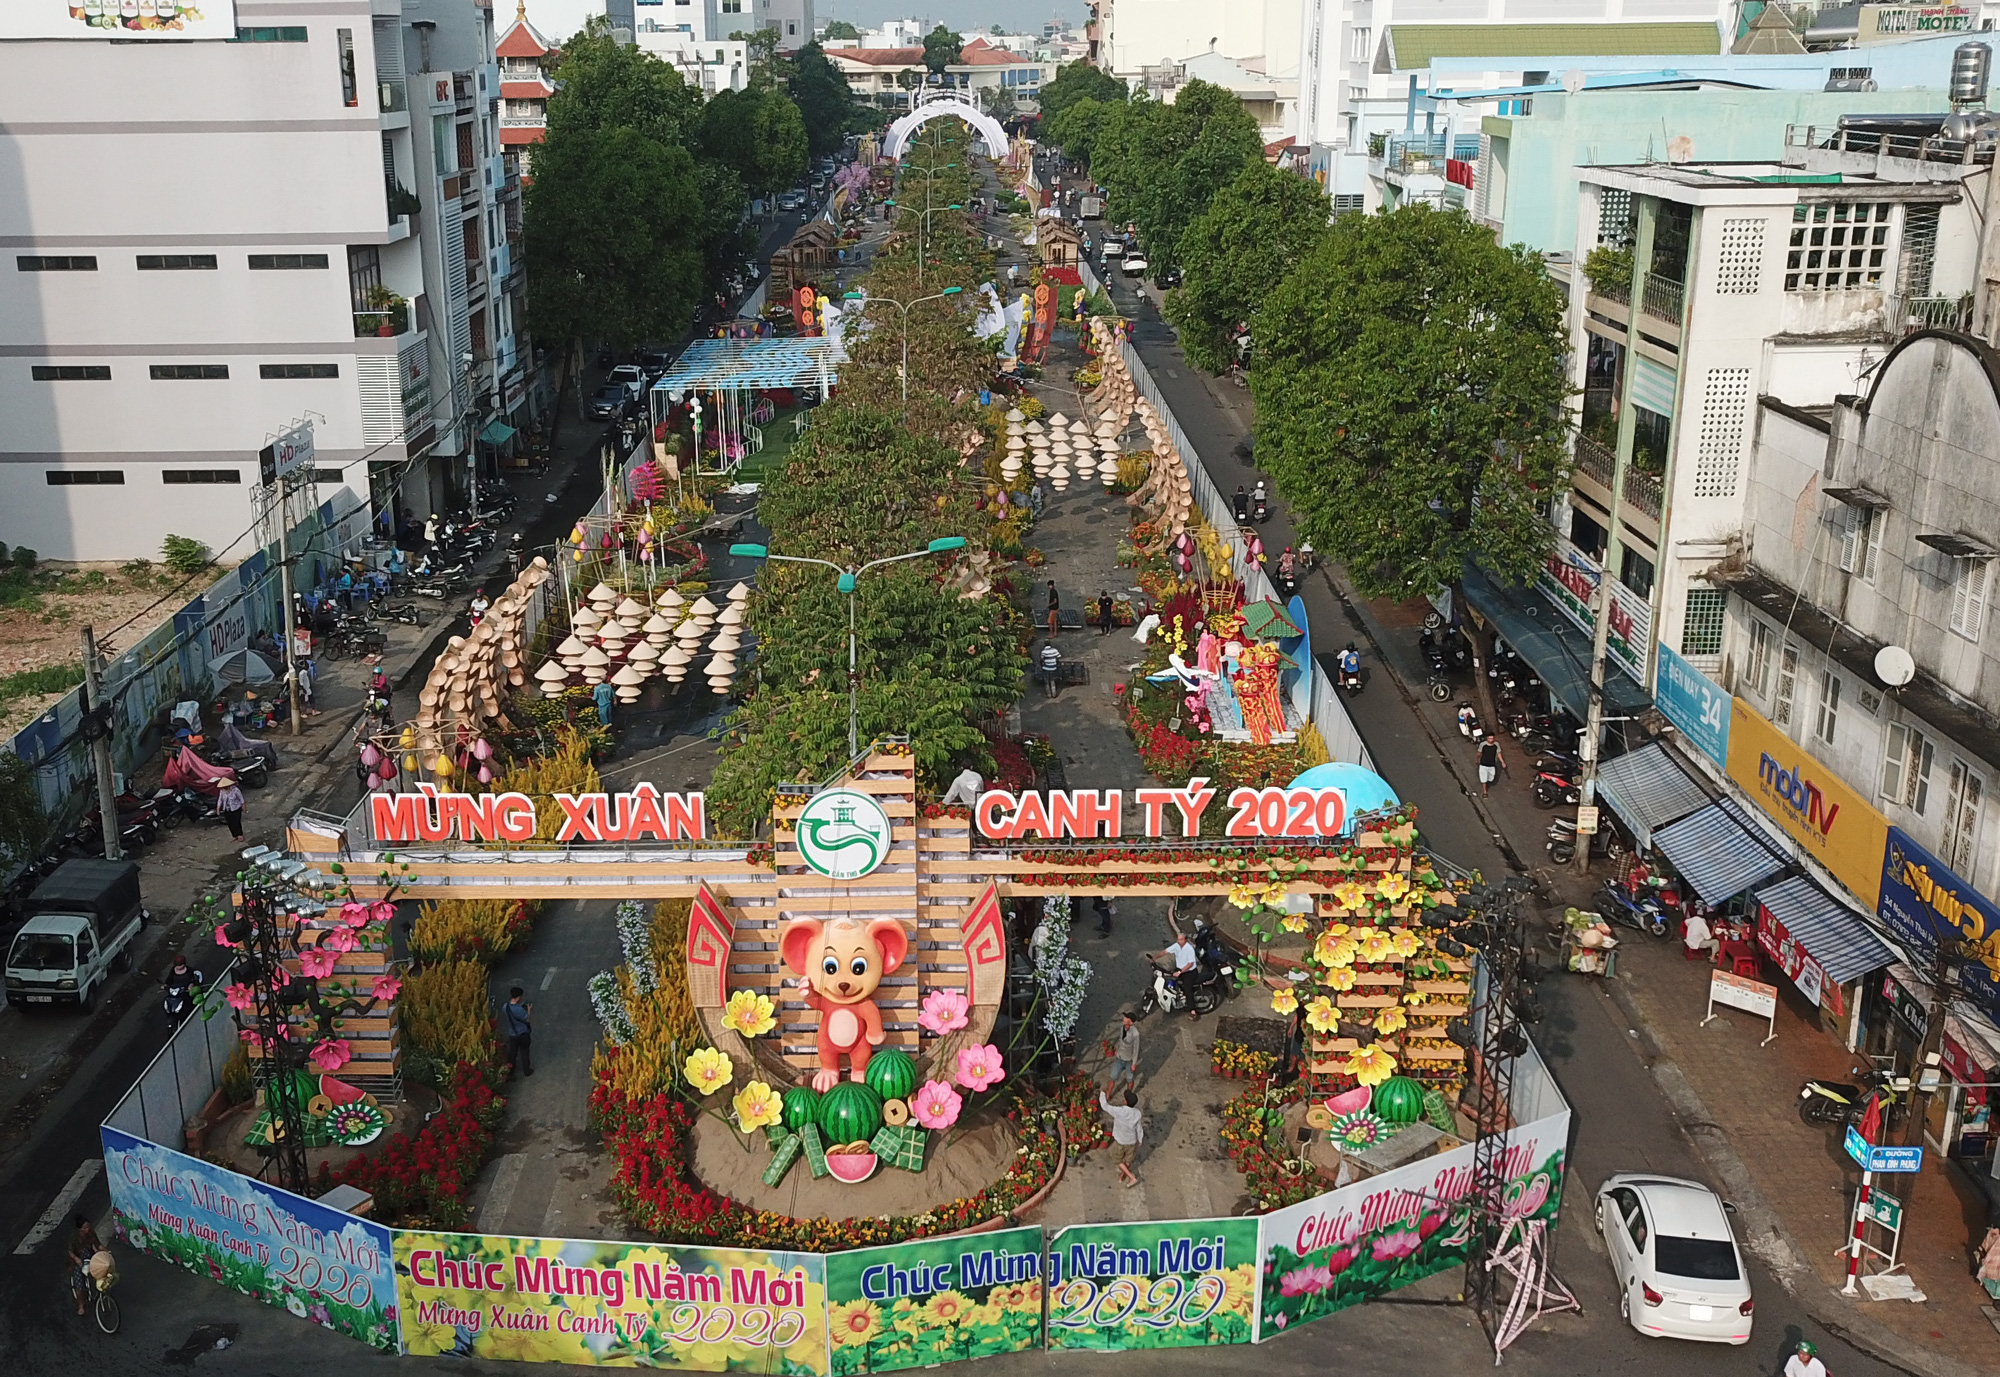 Mekong city given facelift with annual flower street